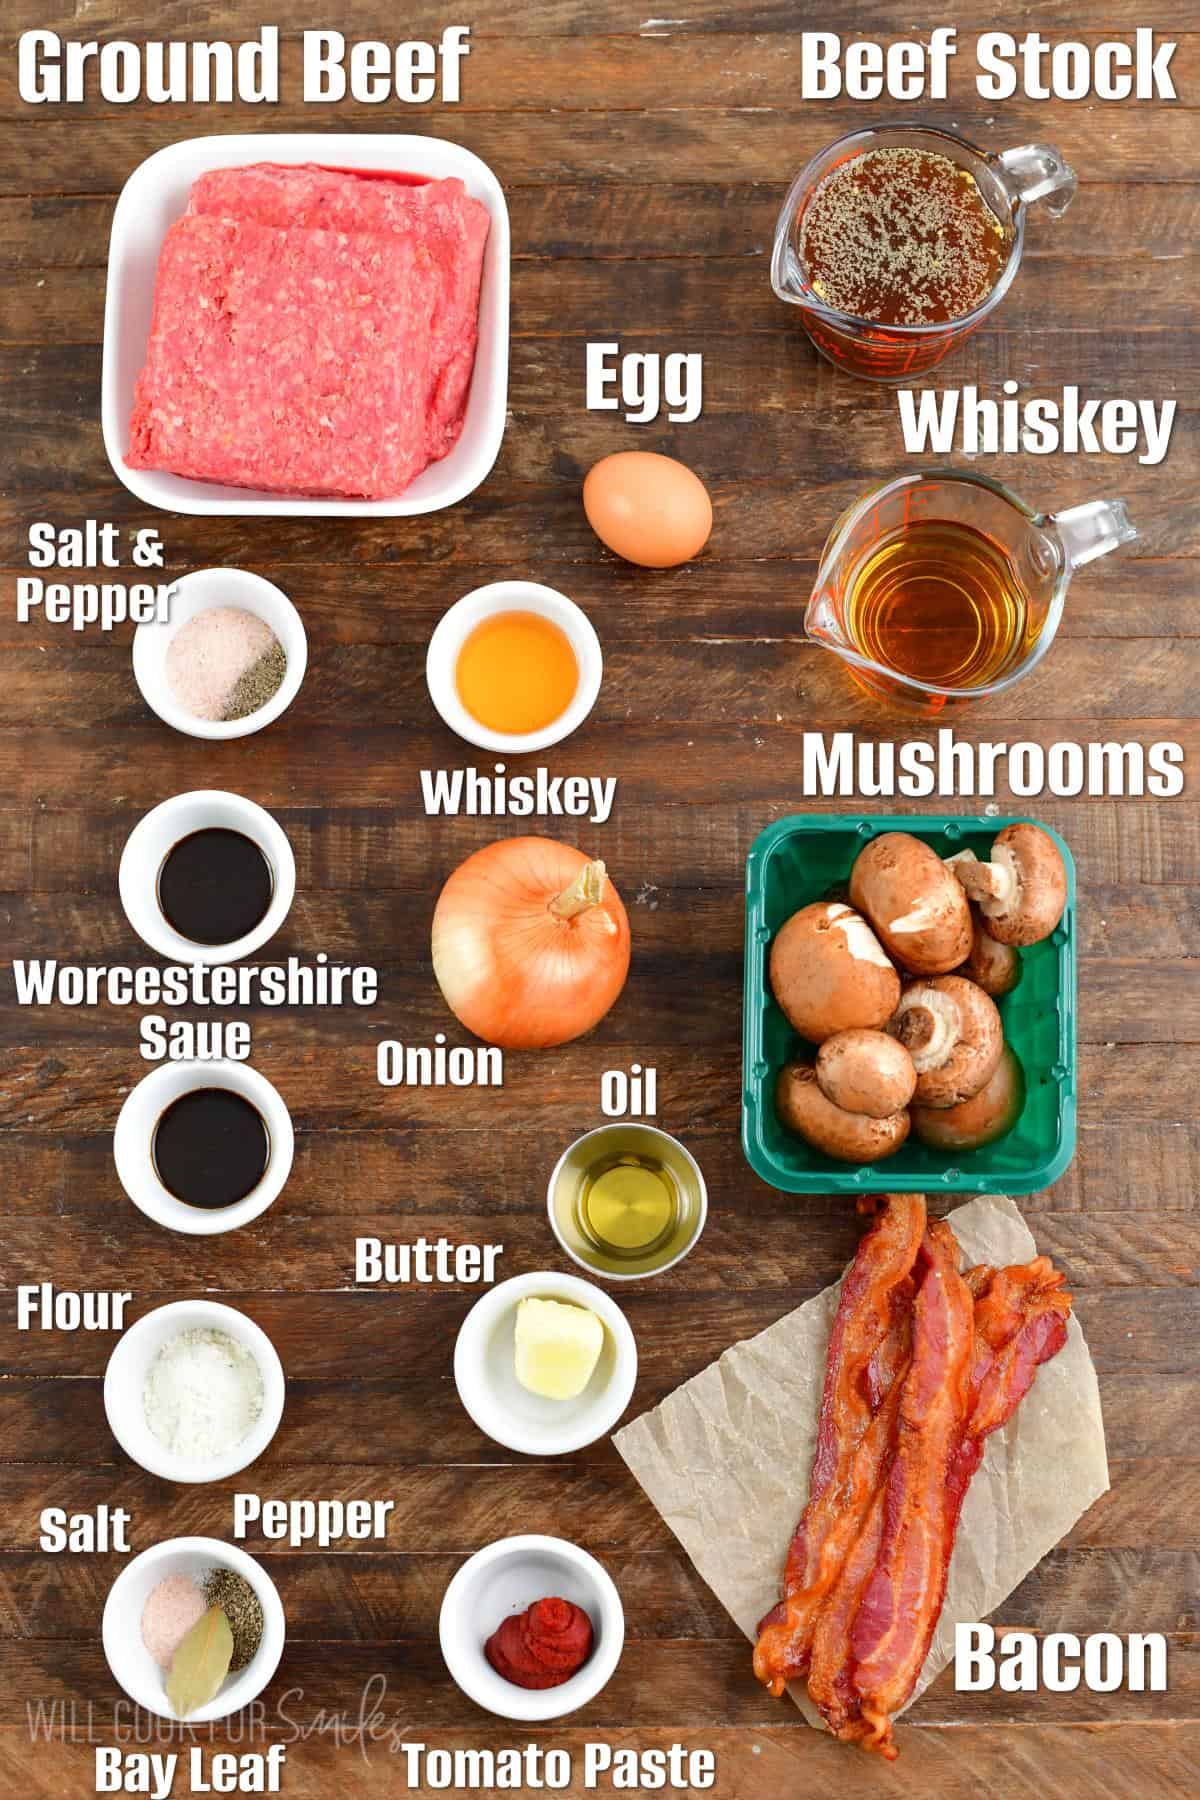 Labeled ingredients for whiskey burgers on a wood surface.